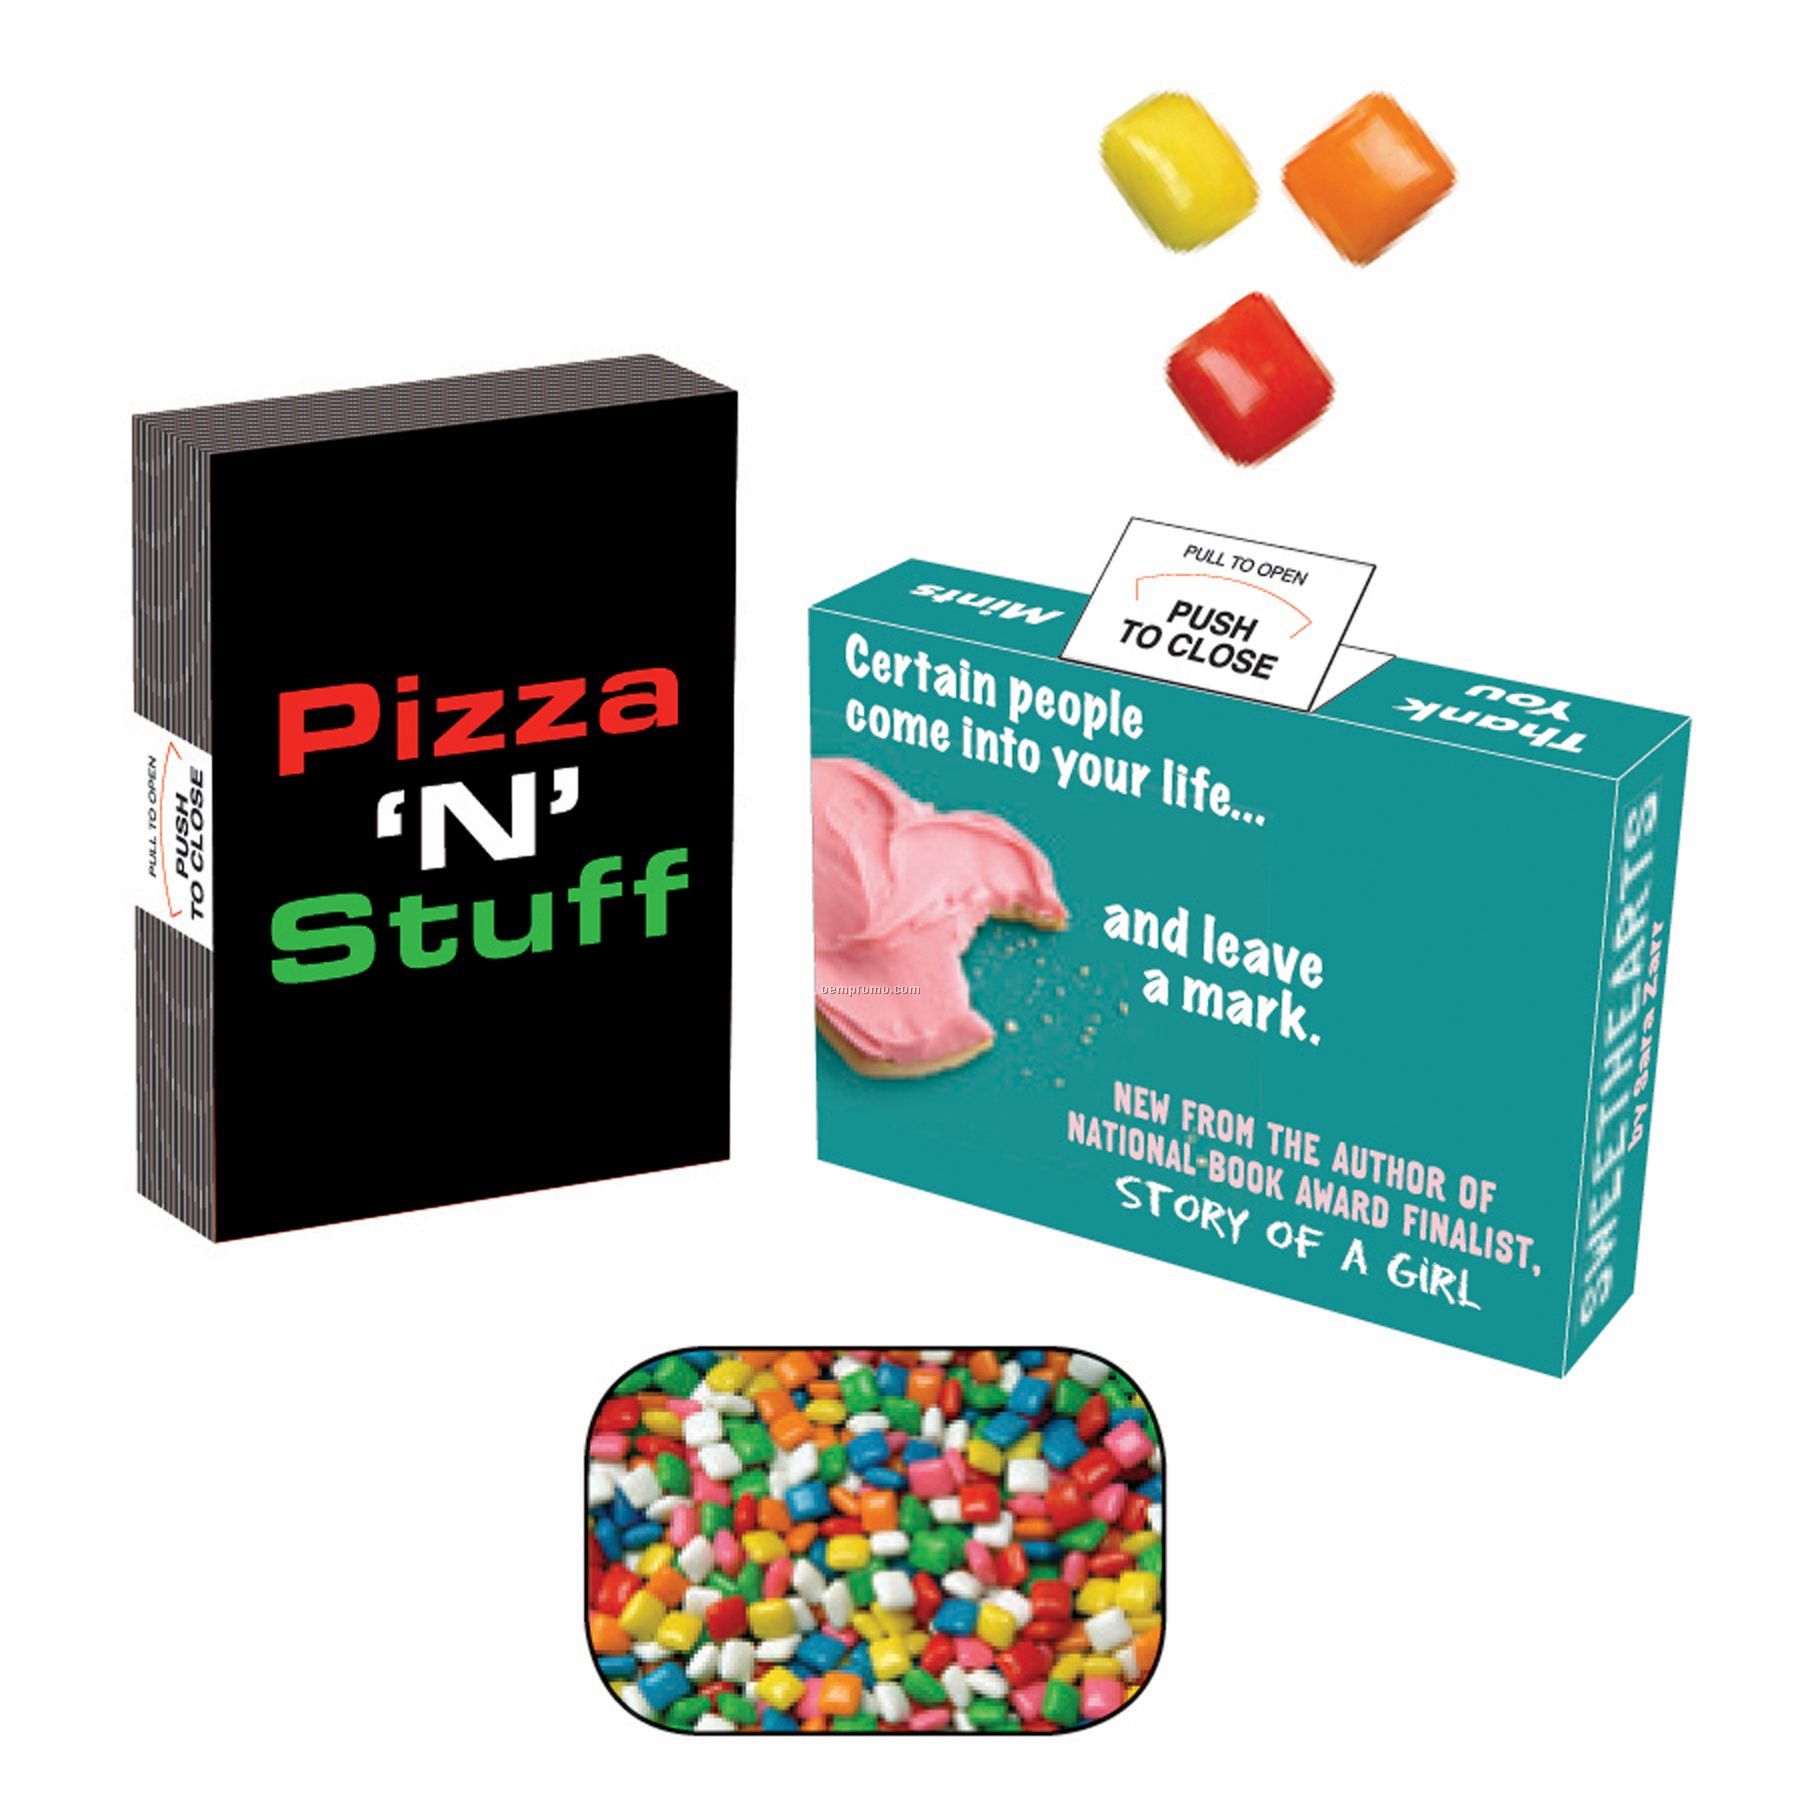 Advertising Mint, Candy & Gum Box Filled With 20-25 Pieces Of Chicklet Gum